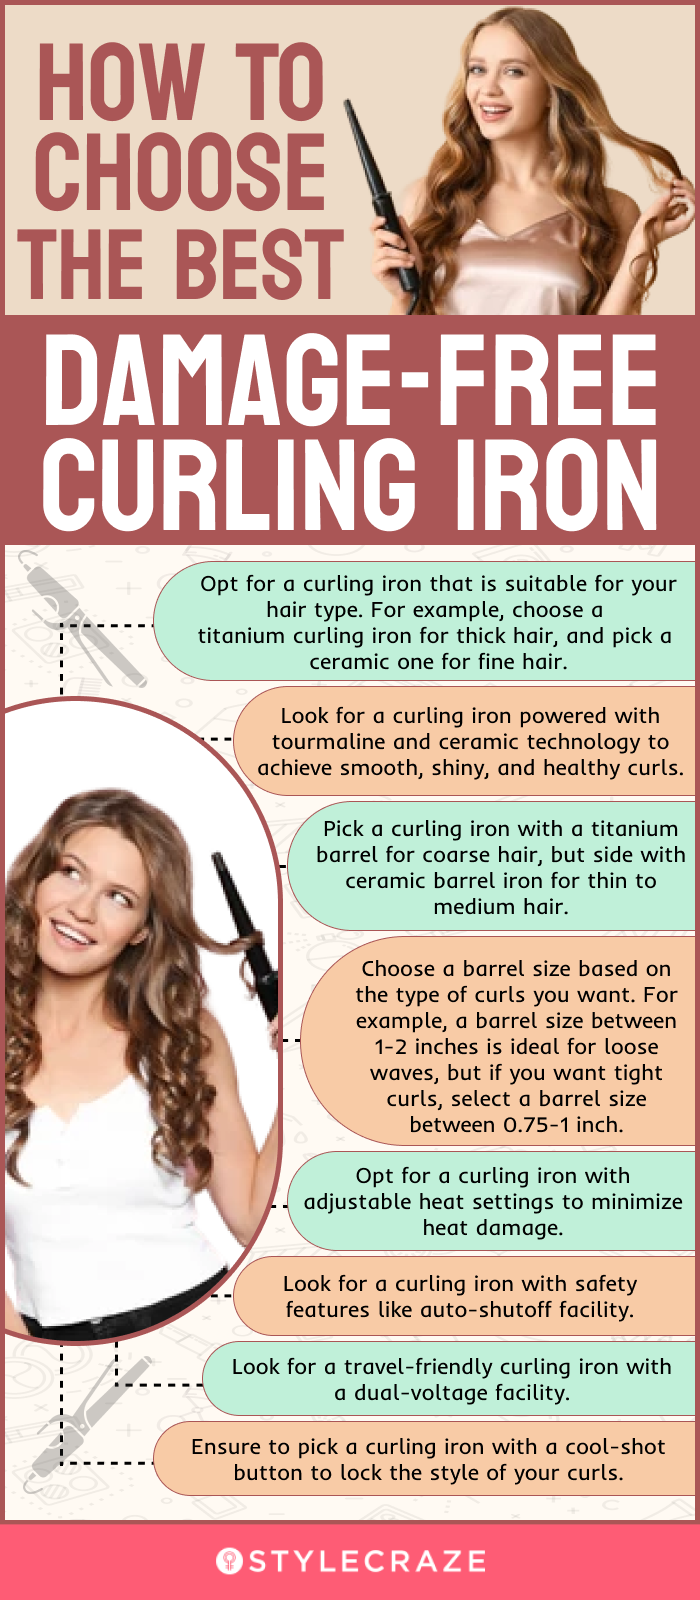 How To Choose The Best Damage-Free Curling Iron (infographic)